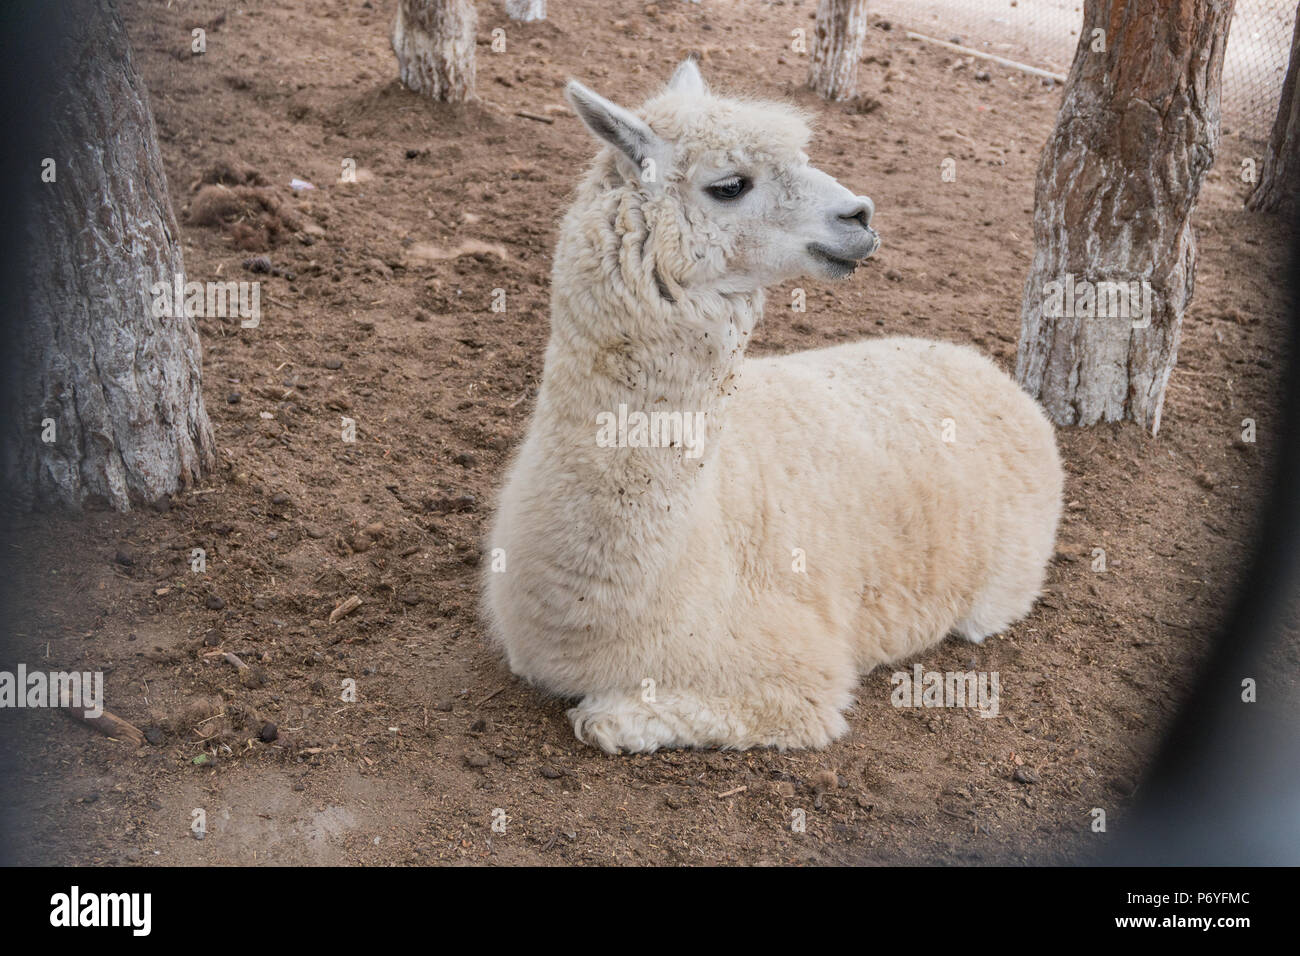 A small white lama relaxes lying on the ground Stock Photo